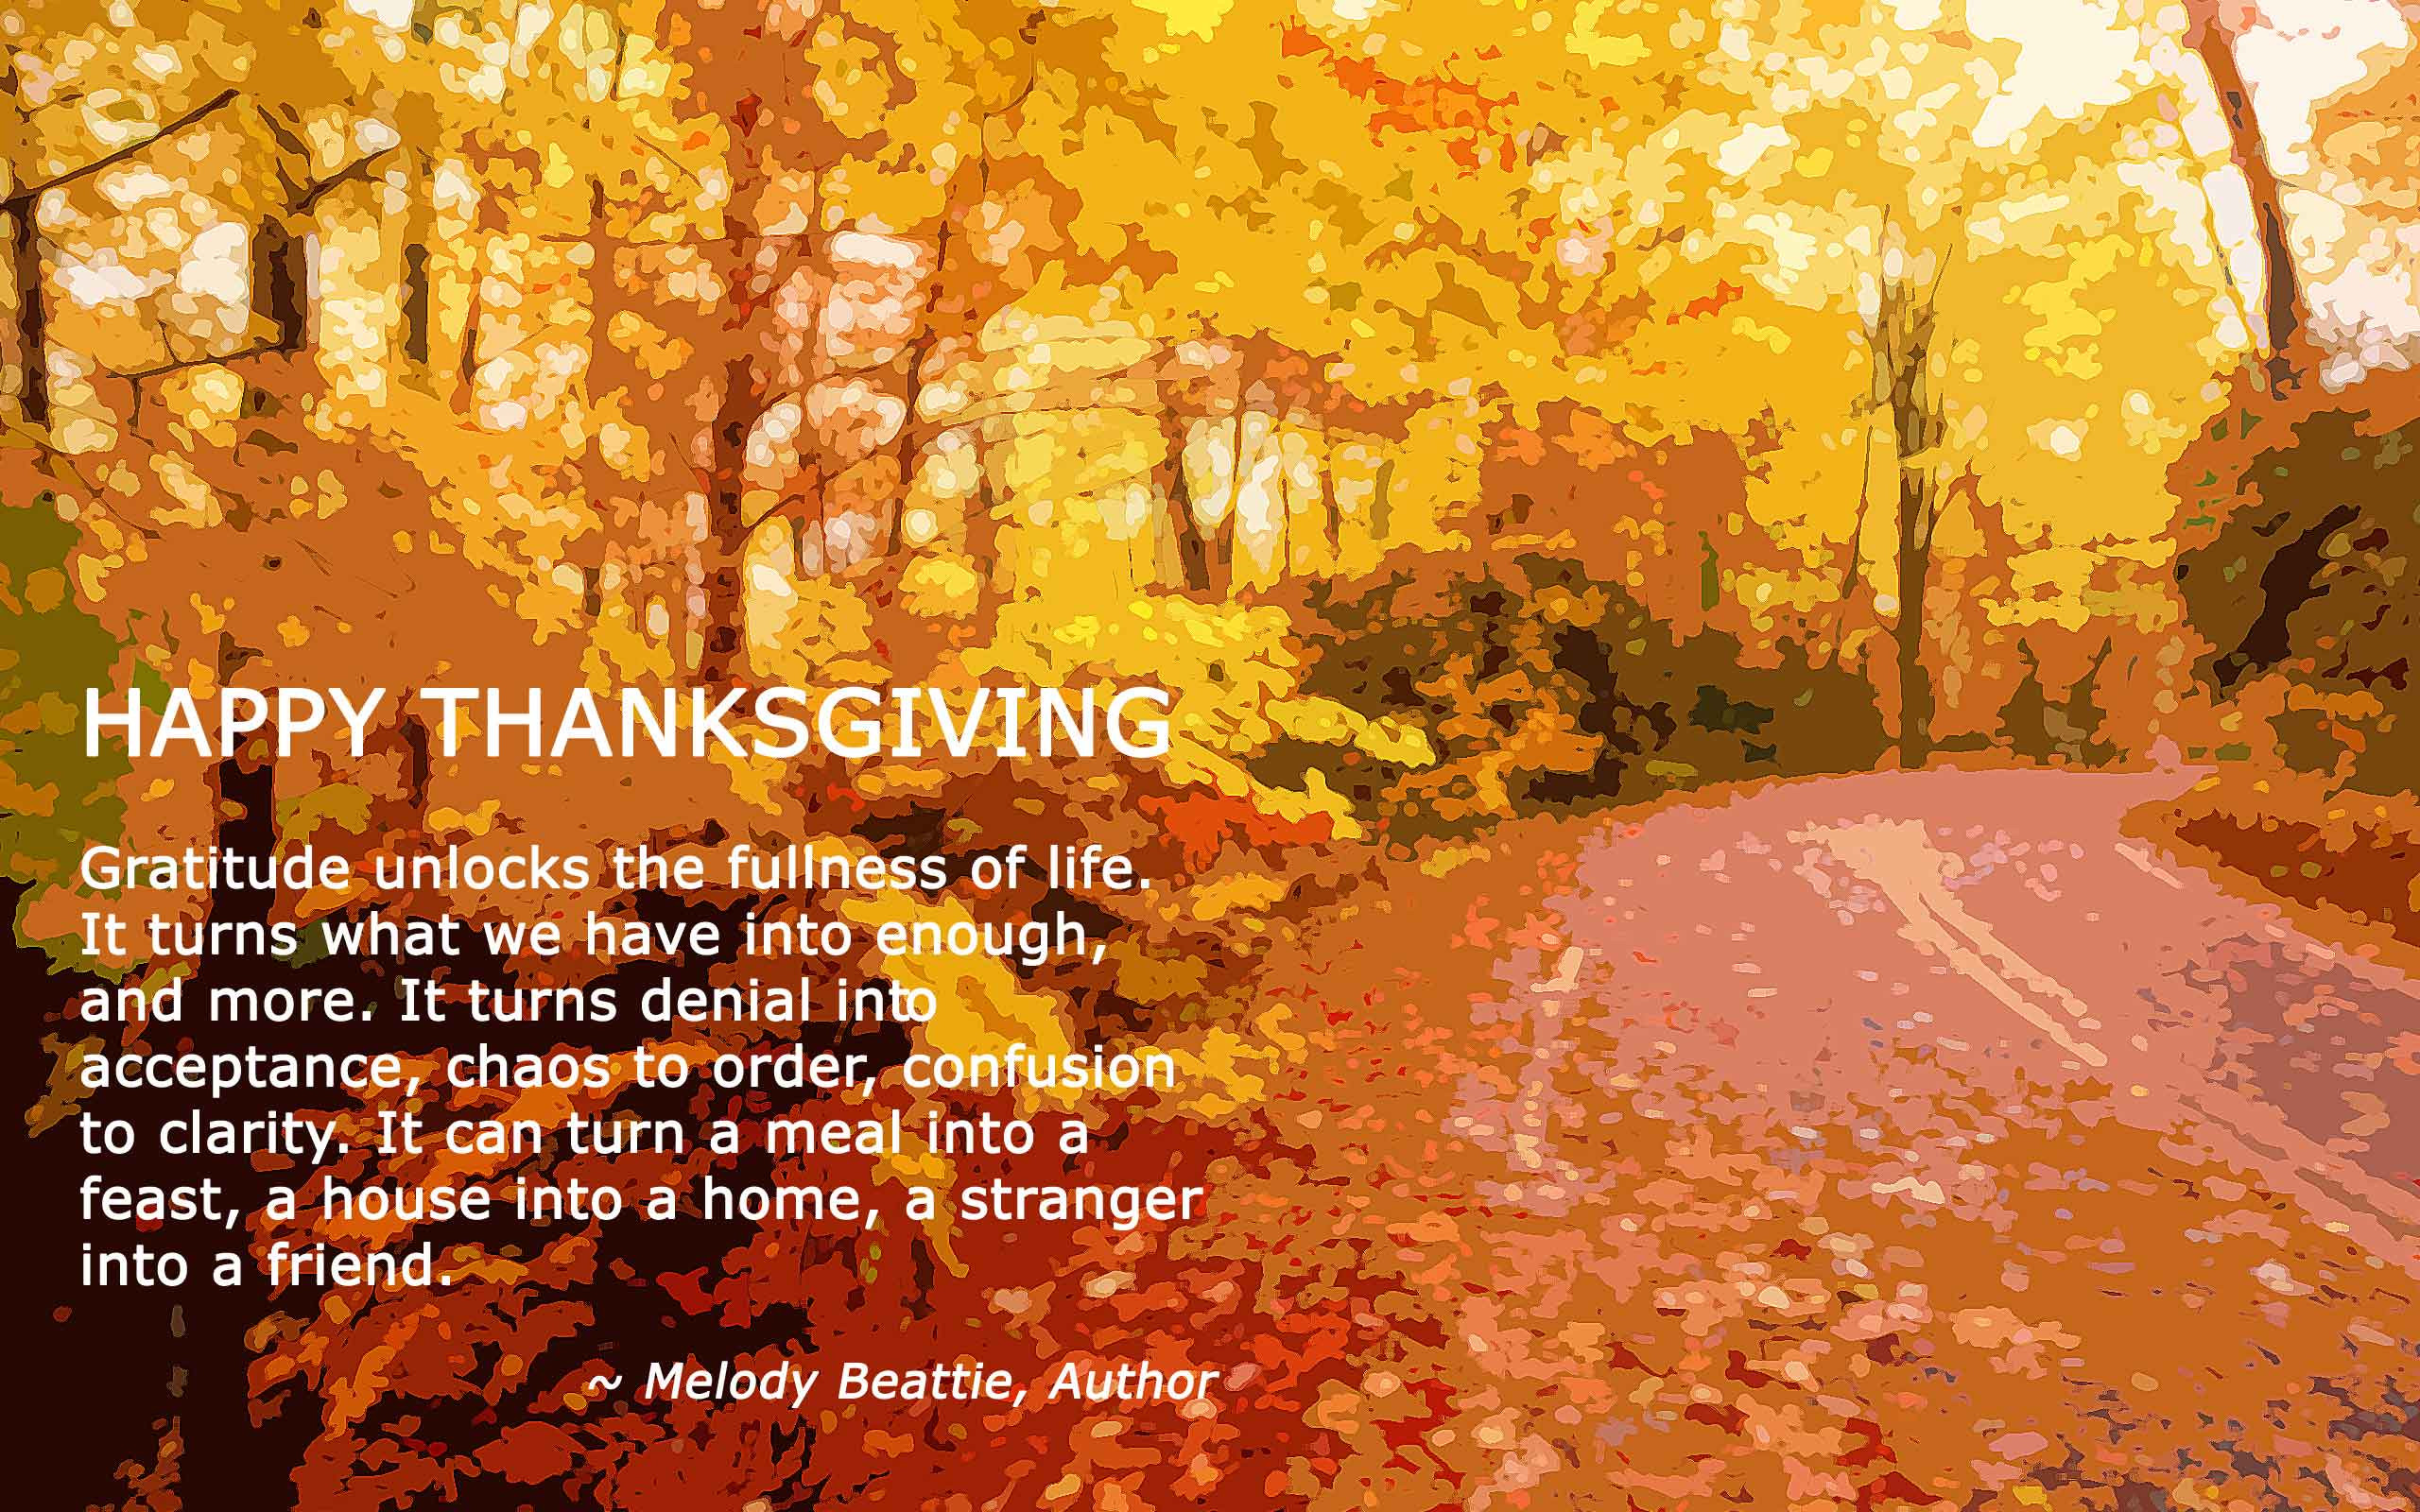 Quotes Of Thanksgiving
 Happy Thanksgiving Be thankful be joyful and remember